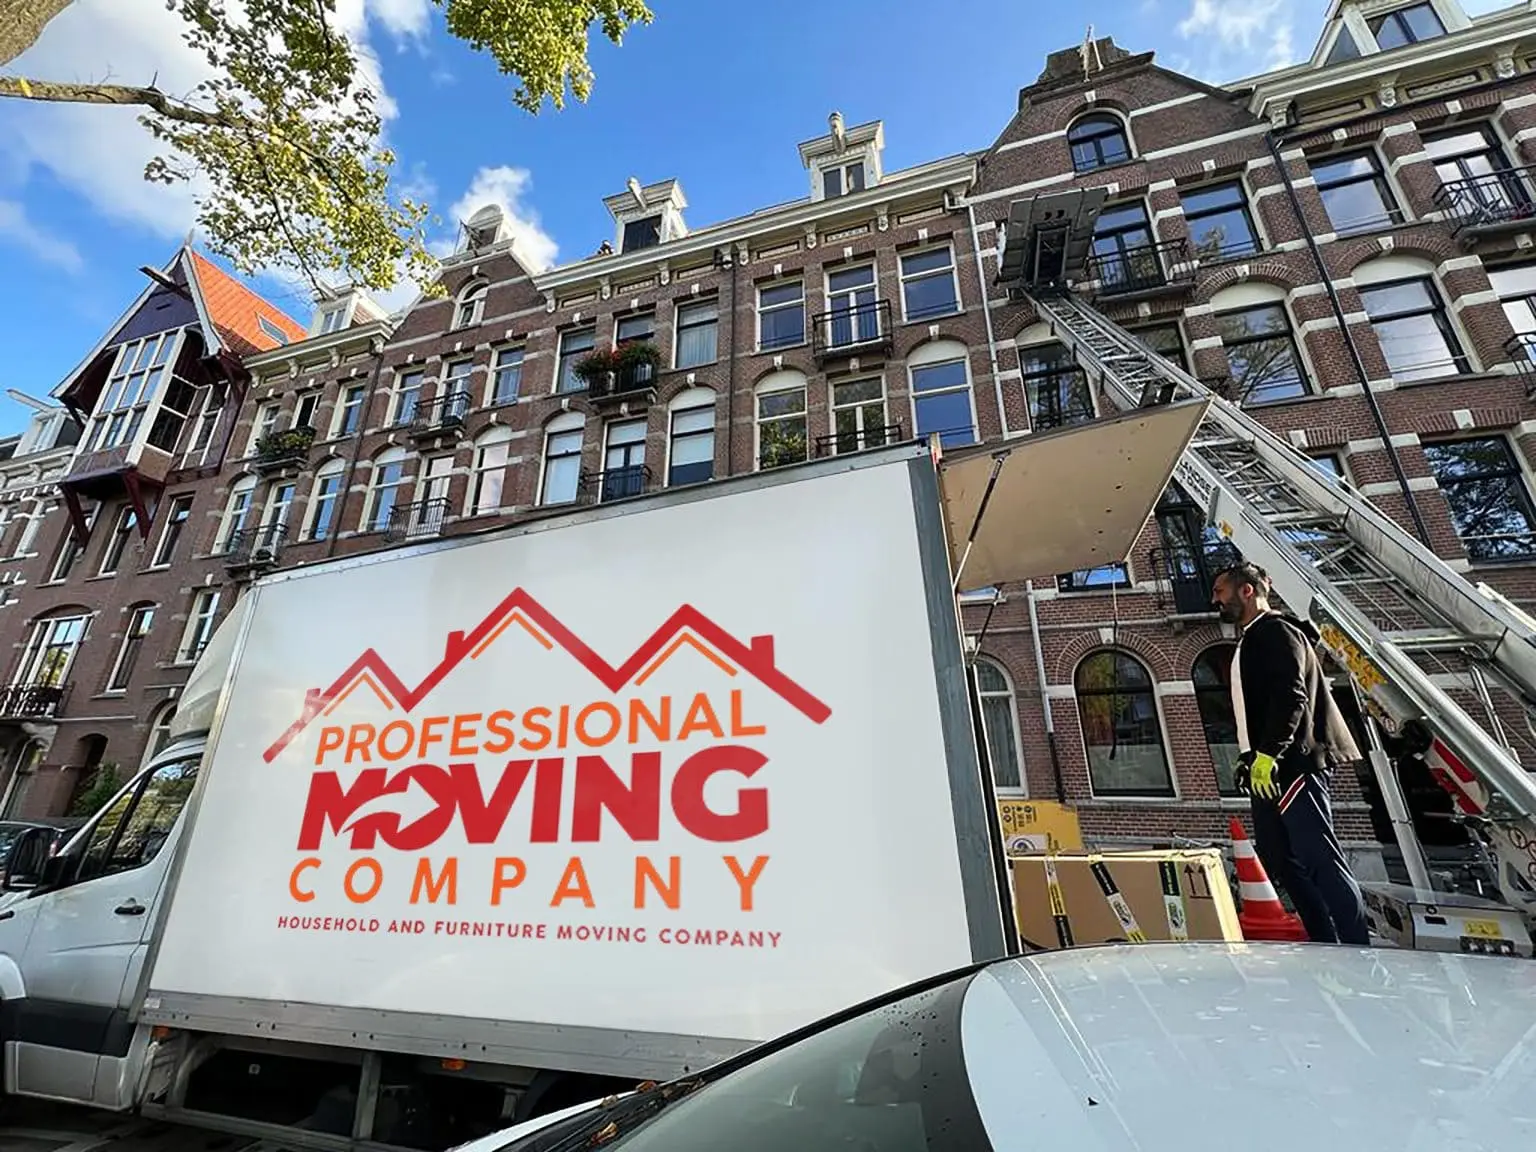 Choosing Professional Moving Company: Your Trusted Partner in Hoorn | Moving Company Hoorn